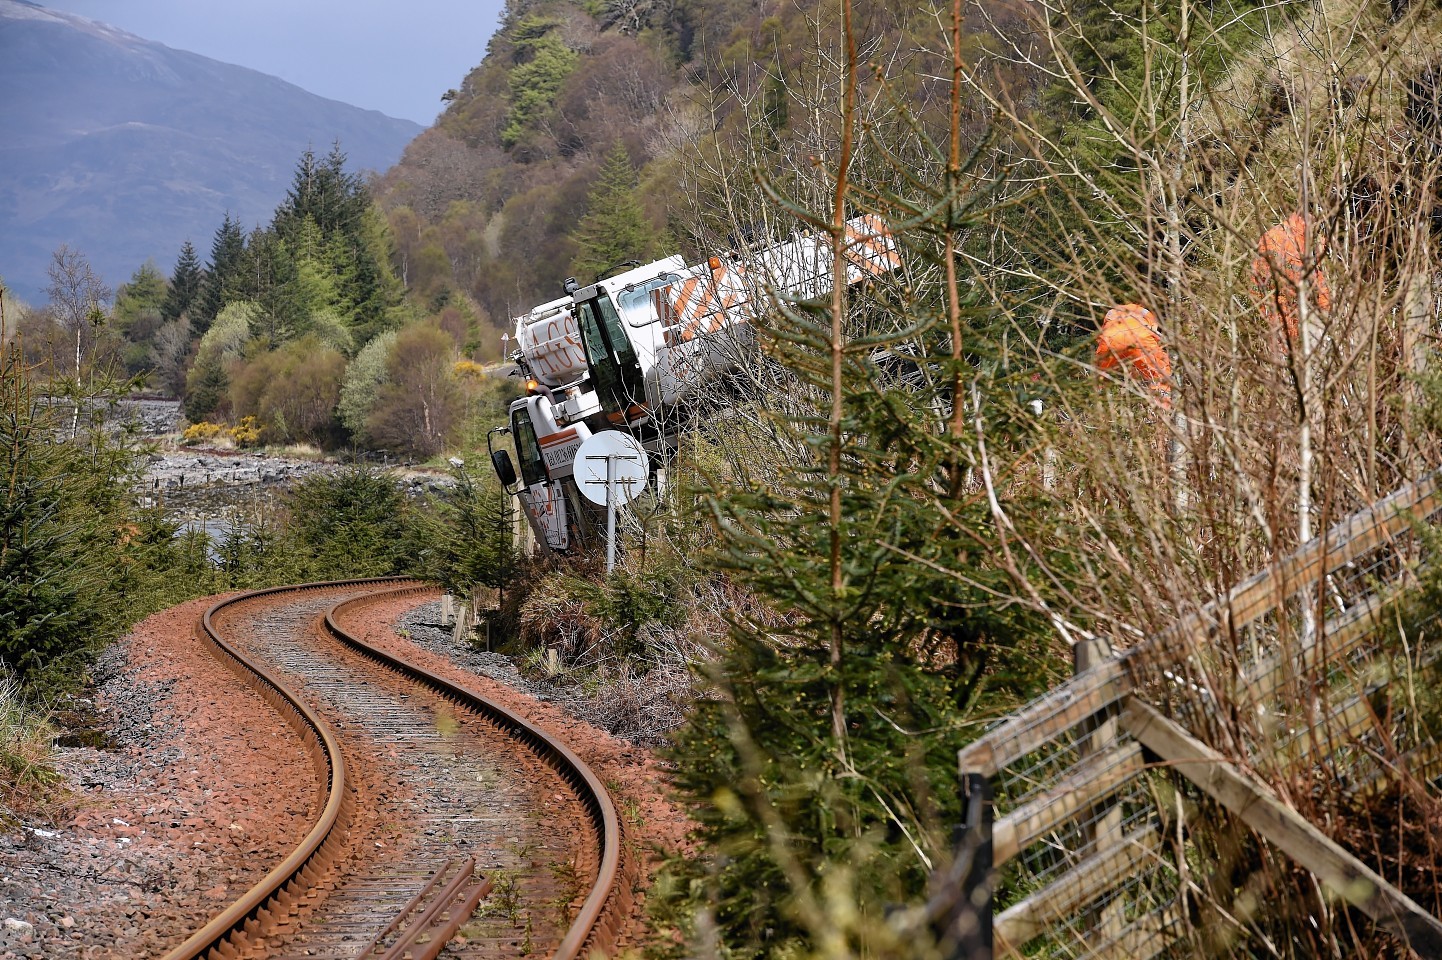 The damaged crane landed on the Inverness to Kyle of Lochalsh railway line